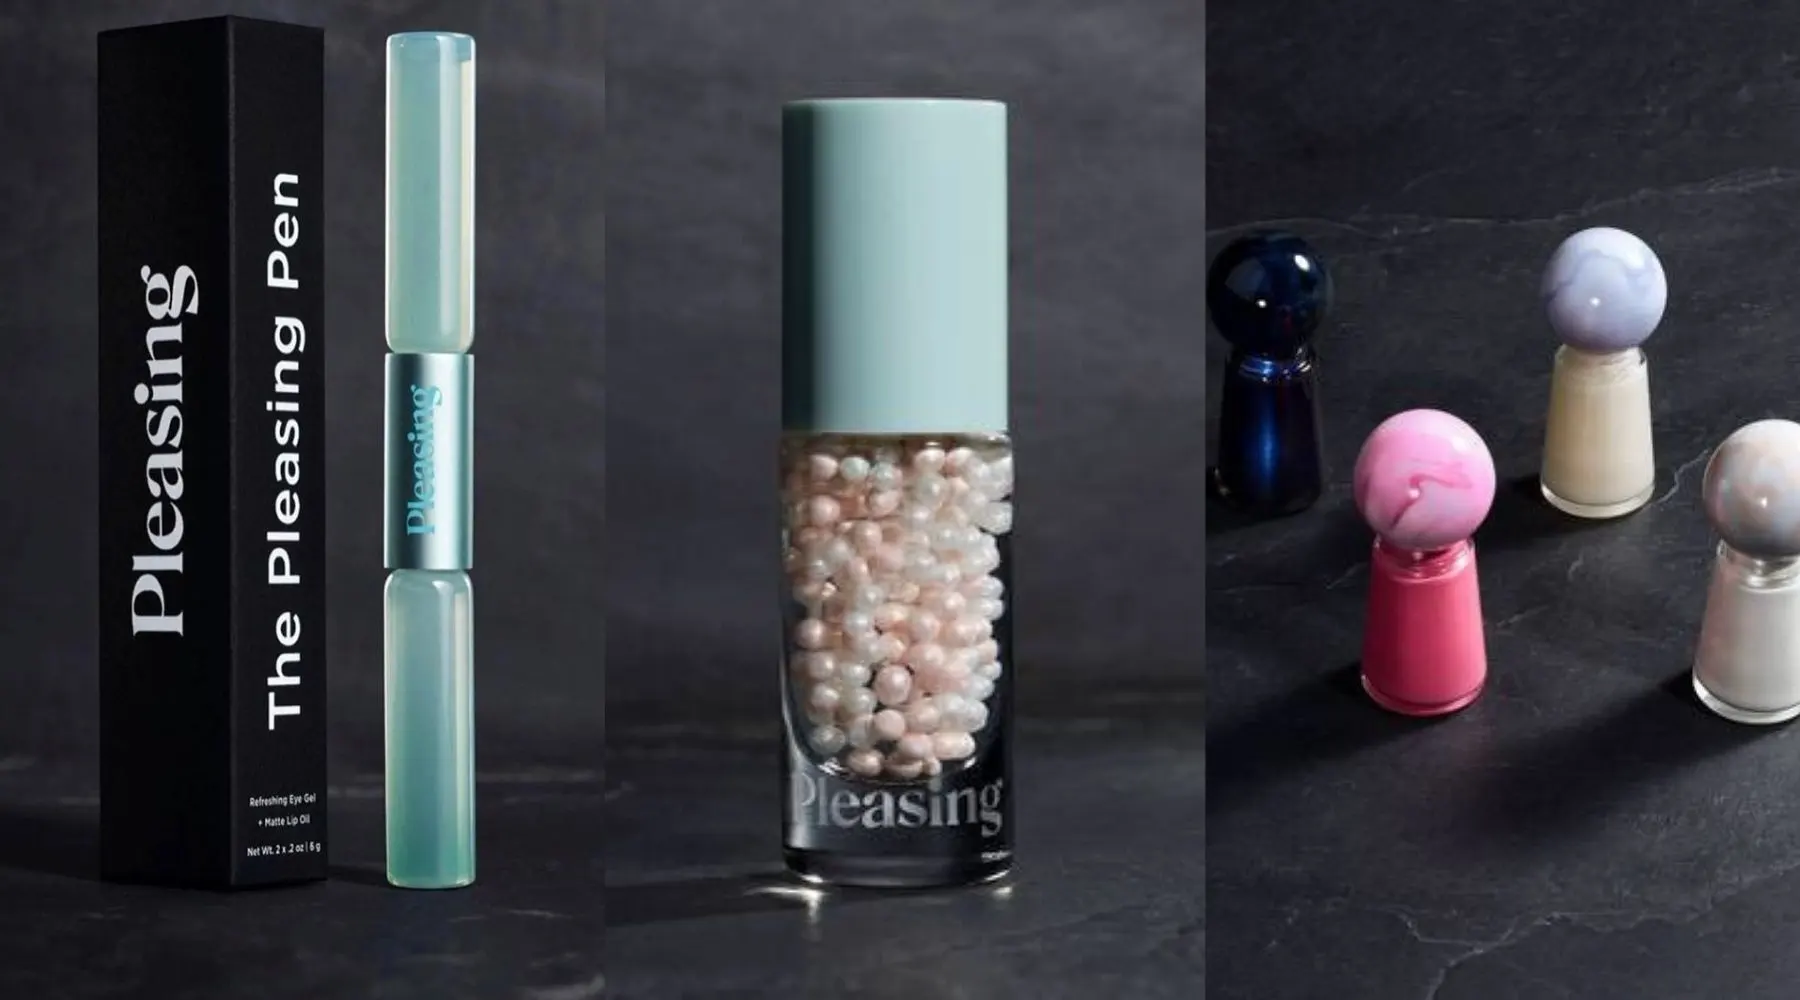 Collage of products from Harry Styles' 'Pleasing' cosmetic and nail polish collection.